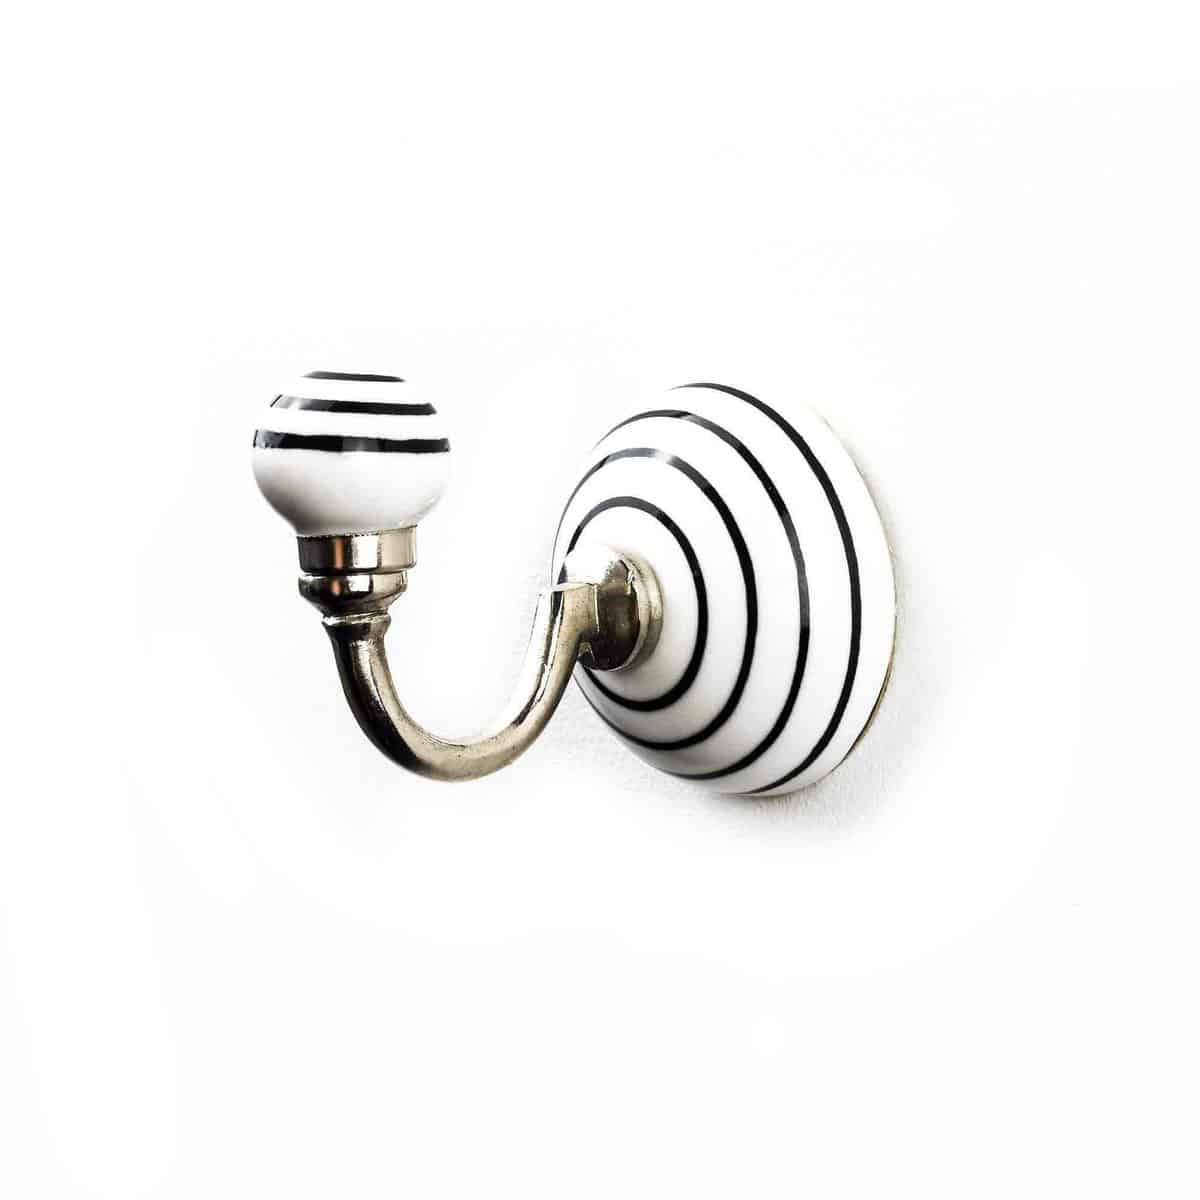 Black and White Striped Wall Hook - Decorative Wall Hooks